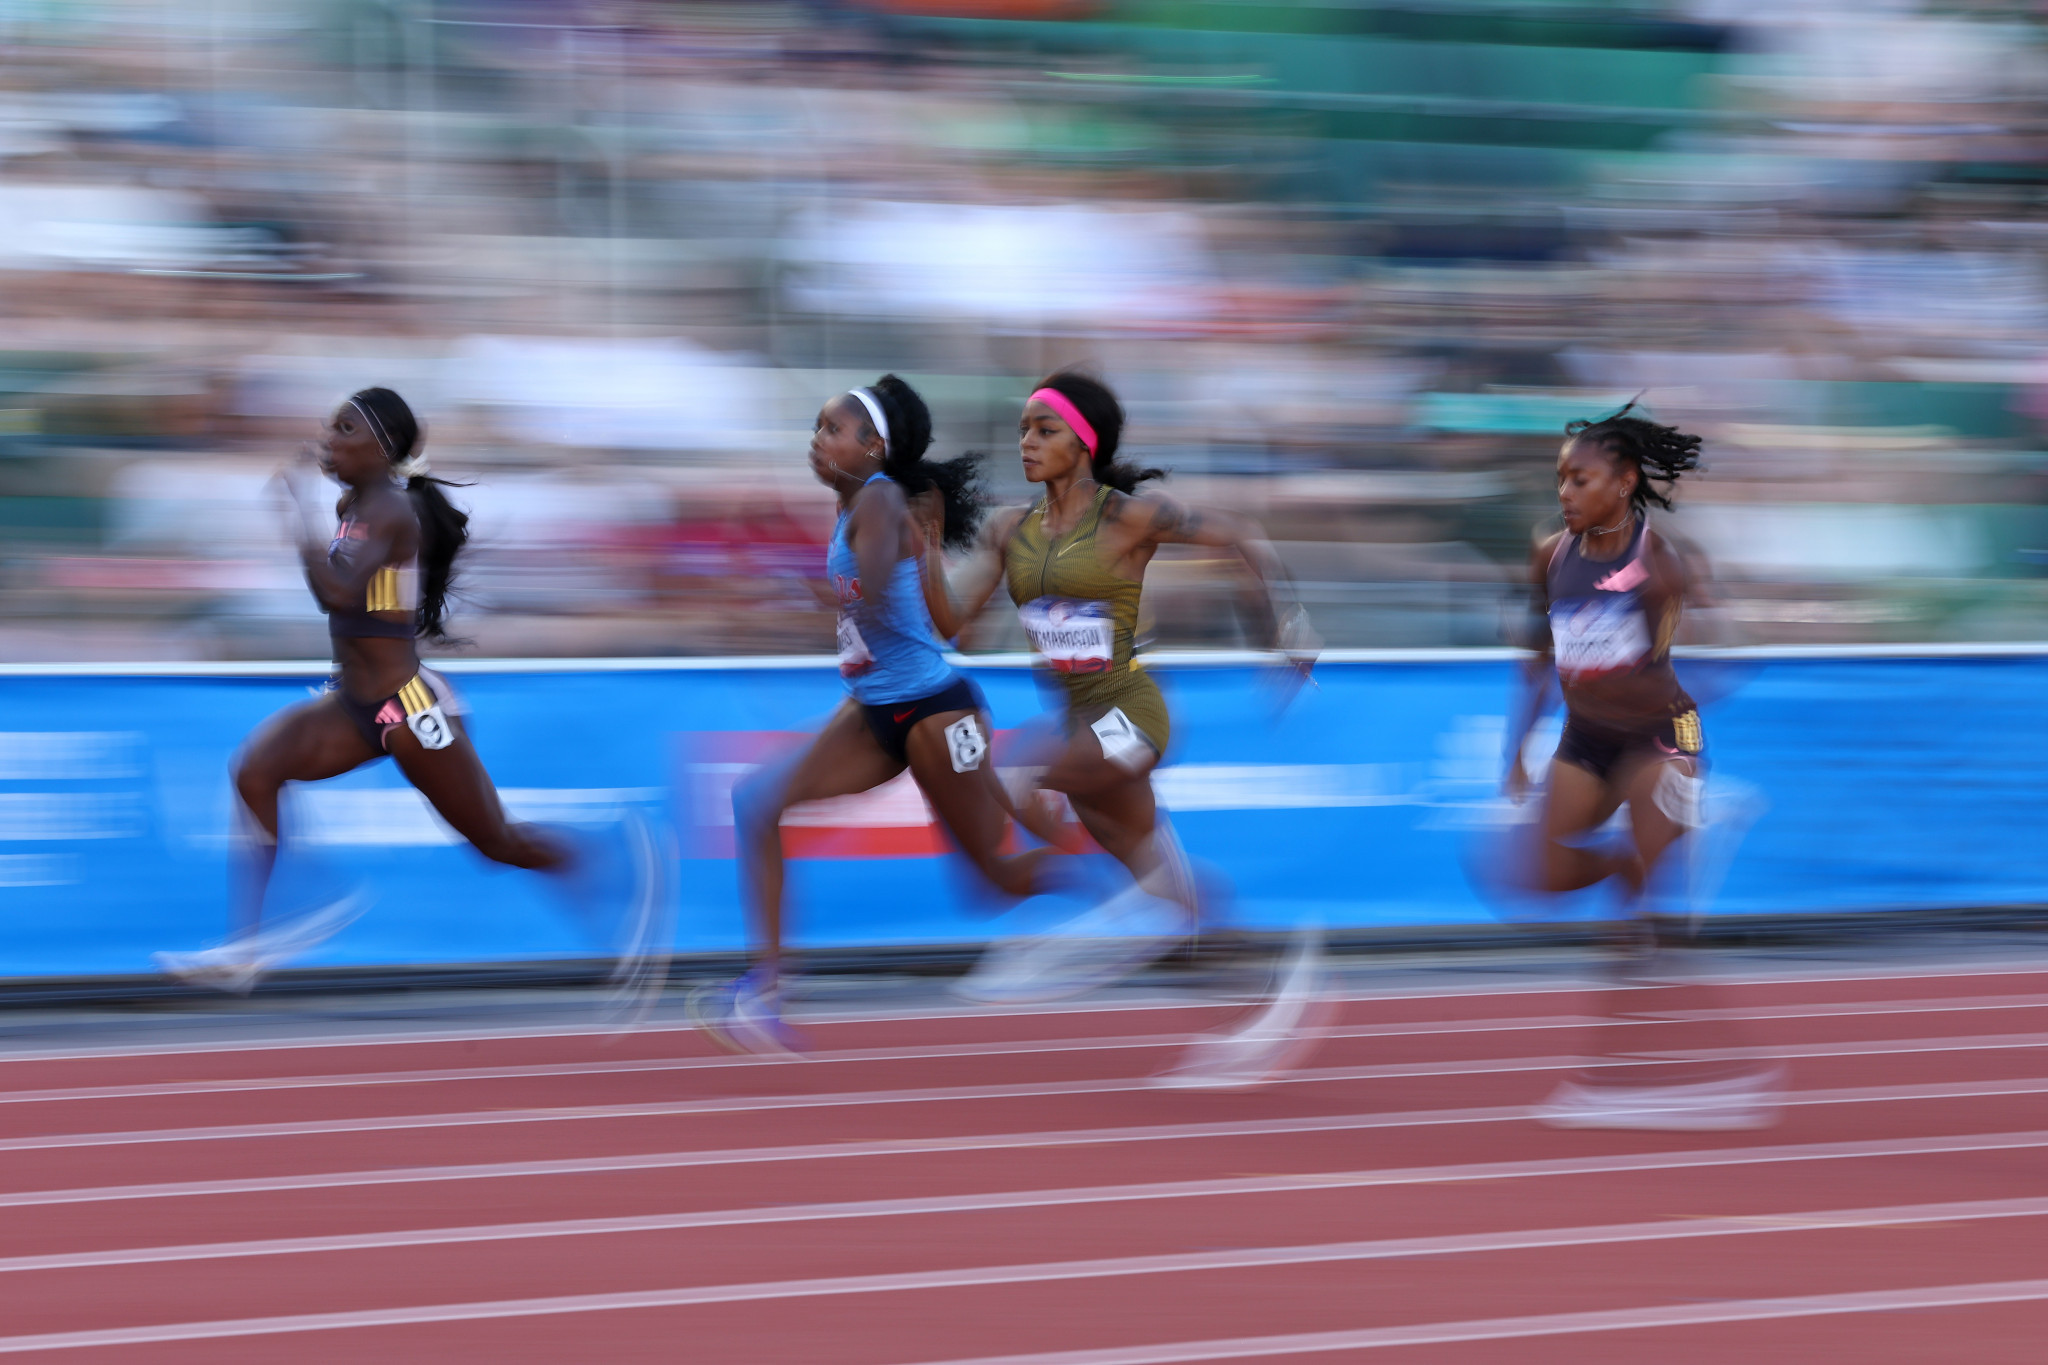 Richardson was the fastest qualifier for Saturday's 100m semi-finals. GETTY IMAGES